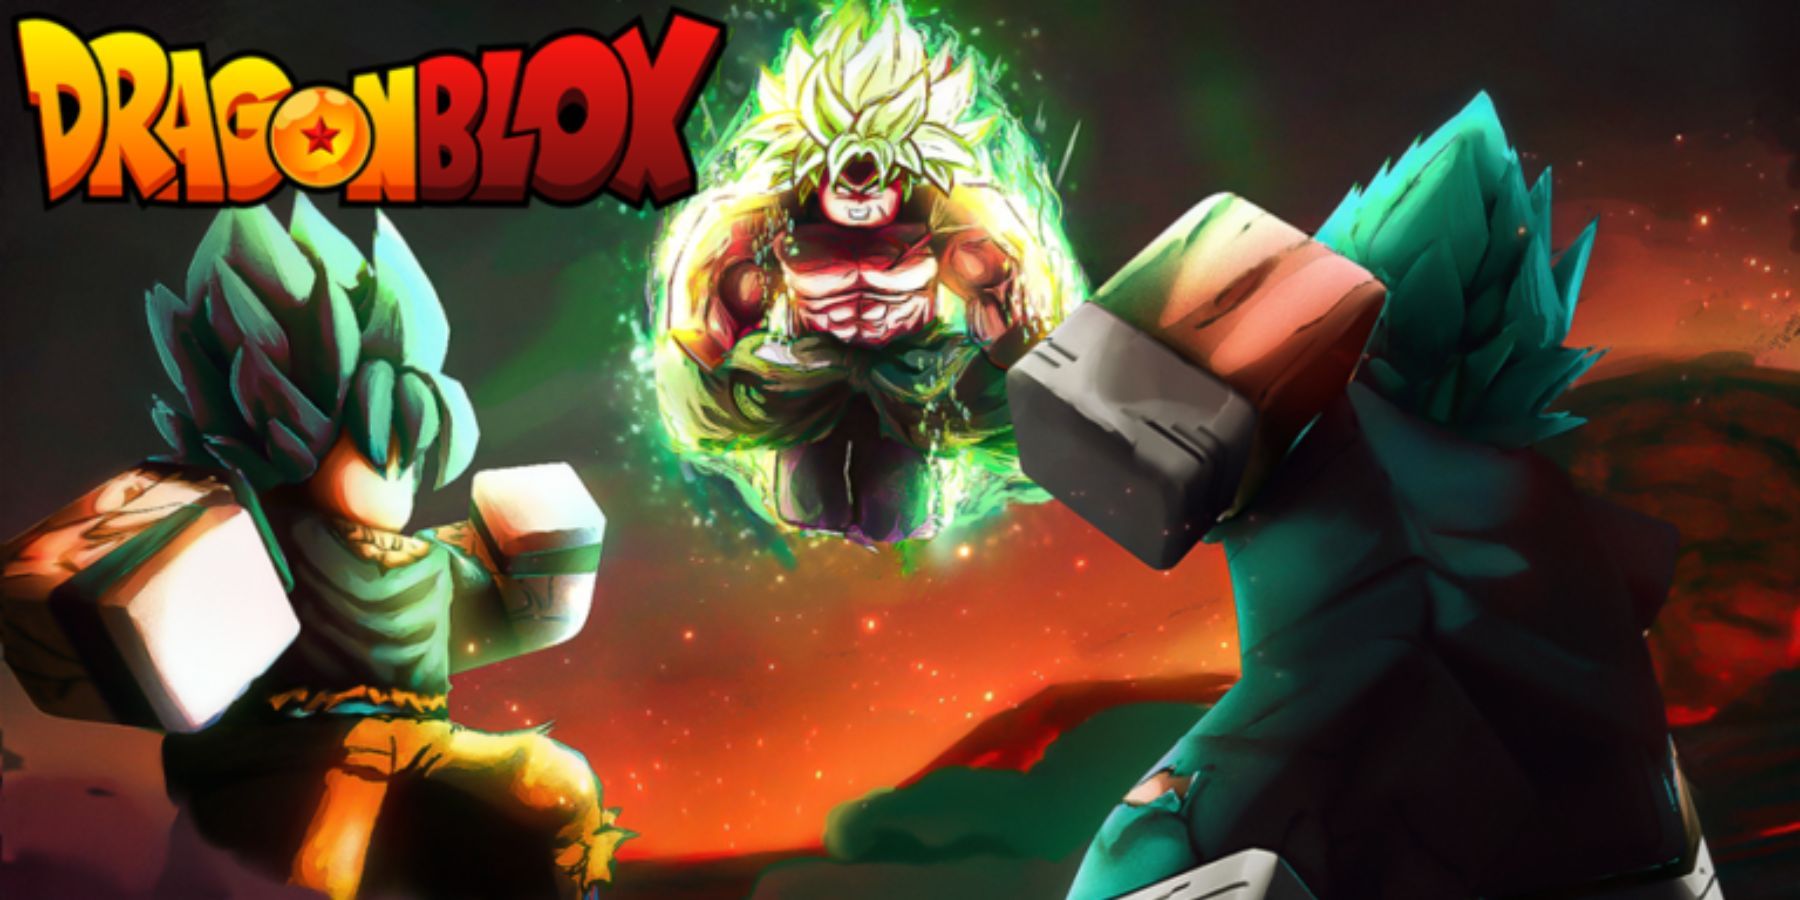 All New [ Dragon ] Update Working Codes 2021 in Roblox Dragon